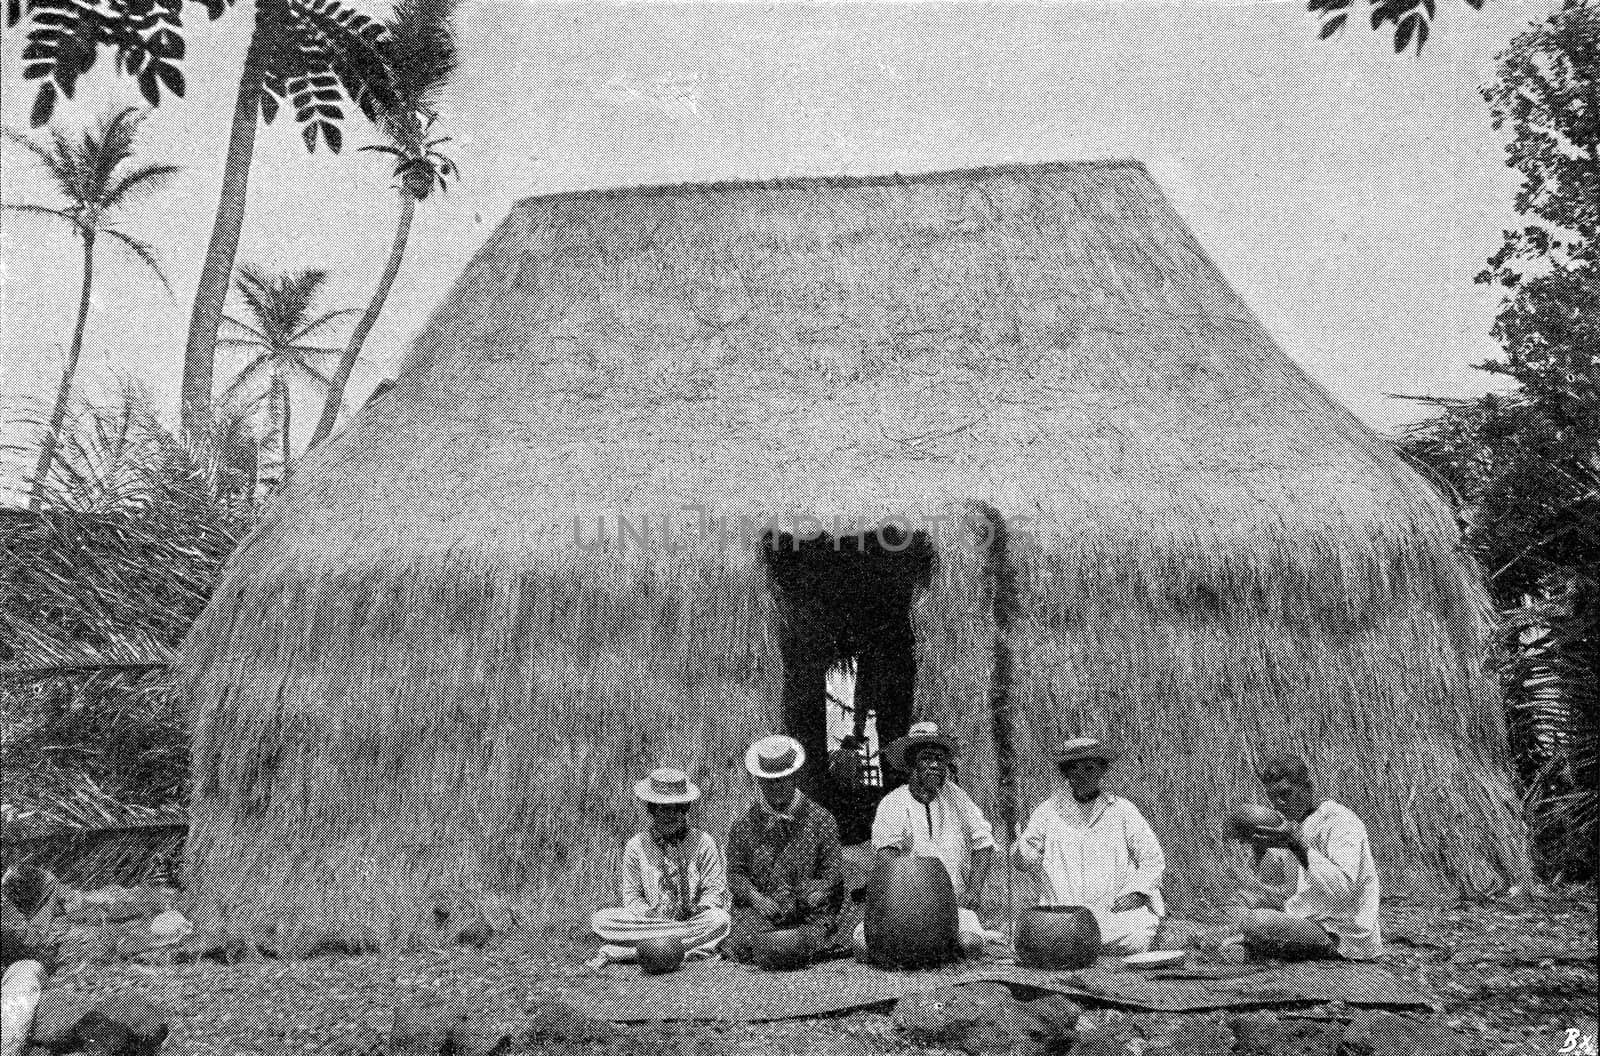 Budding hut of natives of Hawaii, vintage engraved illustration. From the Universe and Humanity, 1910.
